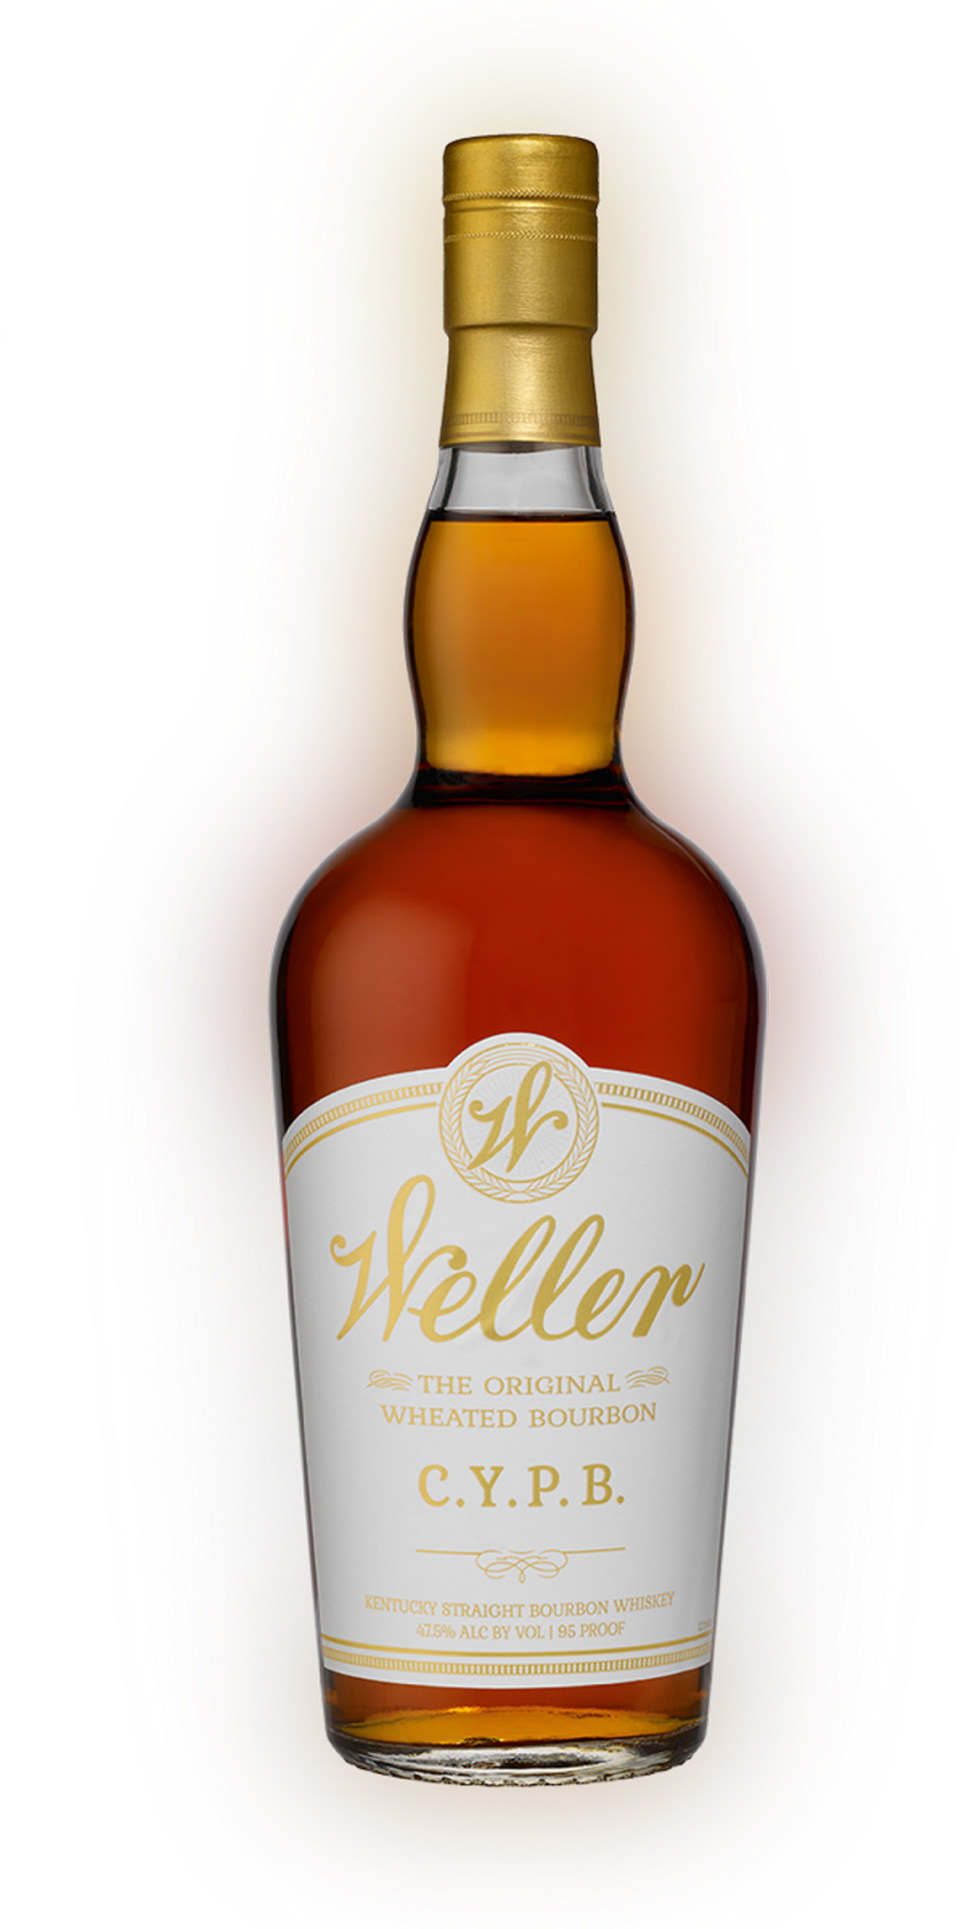 The “Choose Your Perfect Bourbon” interactive project resulted in this 8-year-old Weller, which was recently chosen Best Bourbon in the World by Icons of Whisky.